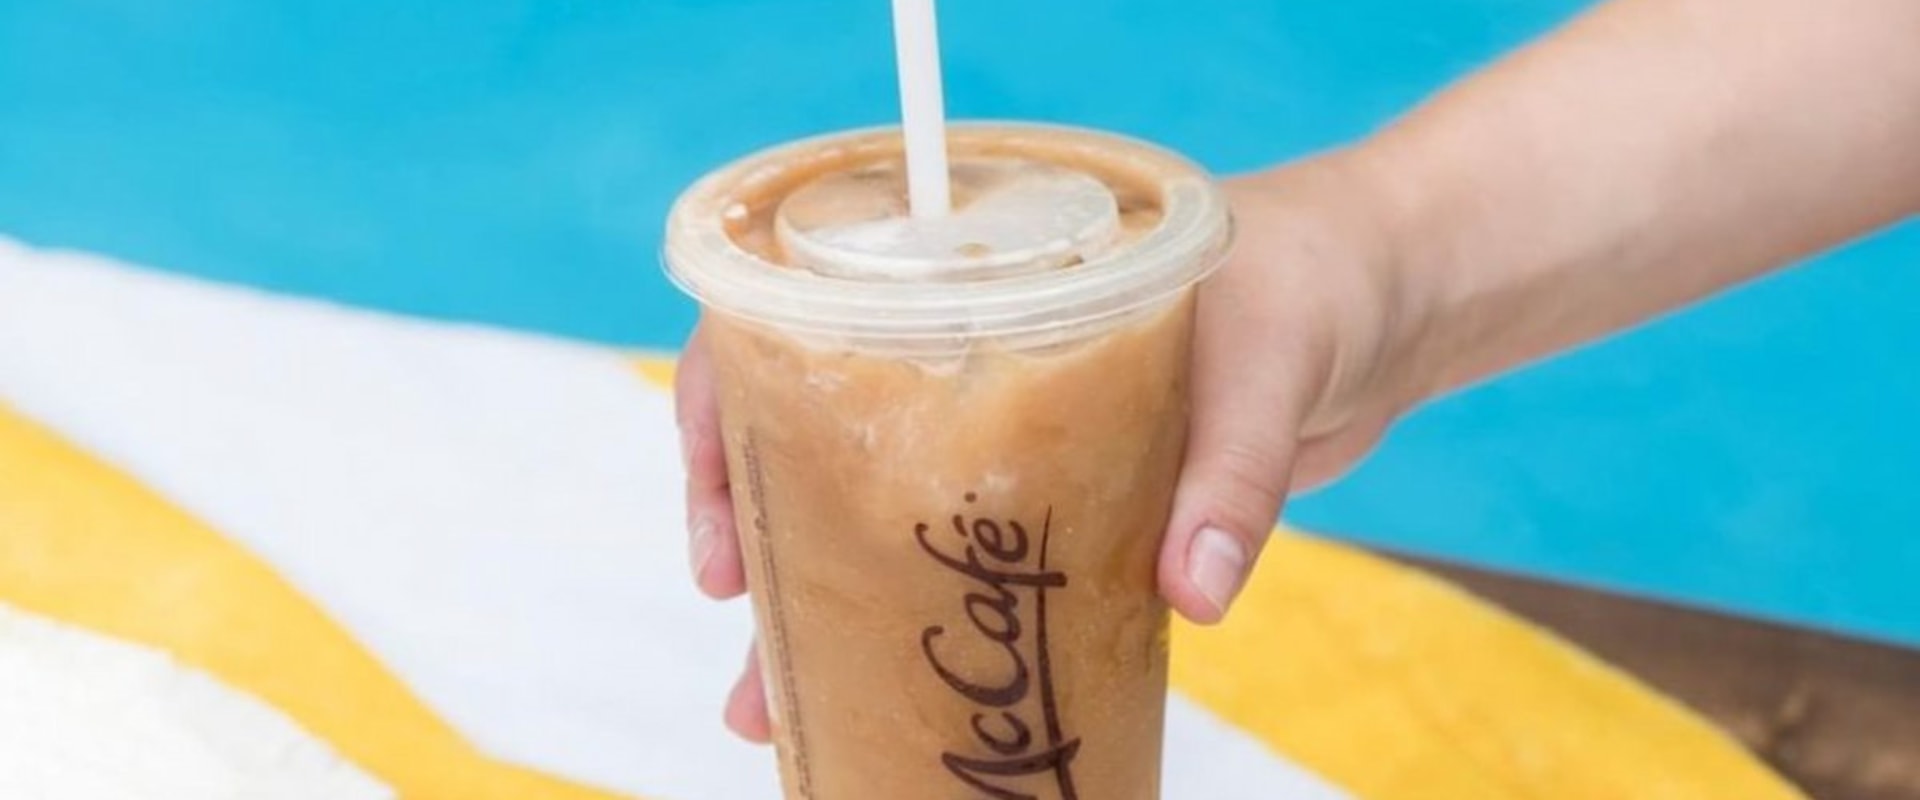 Can You Get McDonald's Iced Coffee Without Sugar?